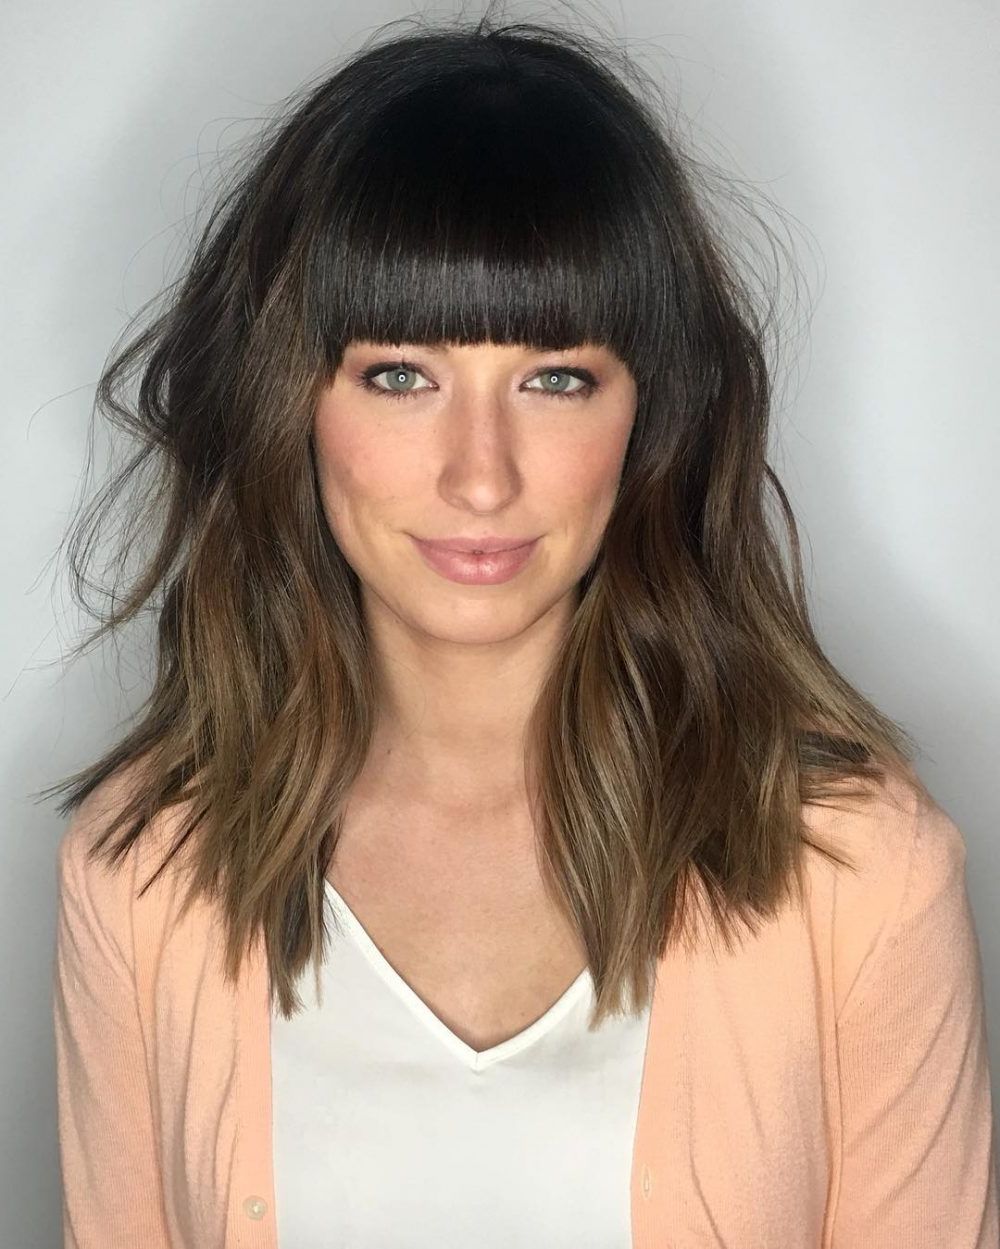 53 Popular Medium Length Hairstyles With Bangs In 2019 With Widely Used Medium Hairstyles With Big Bangs (View 2 of 20)